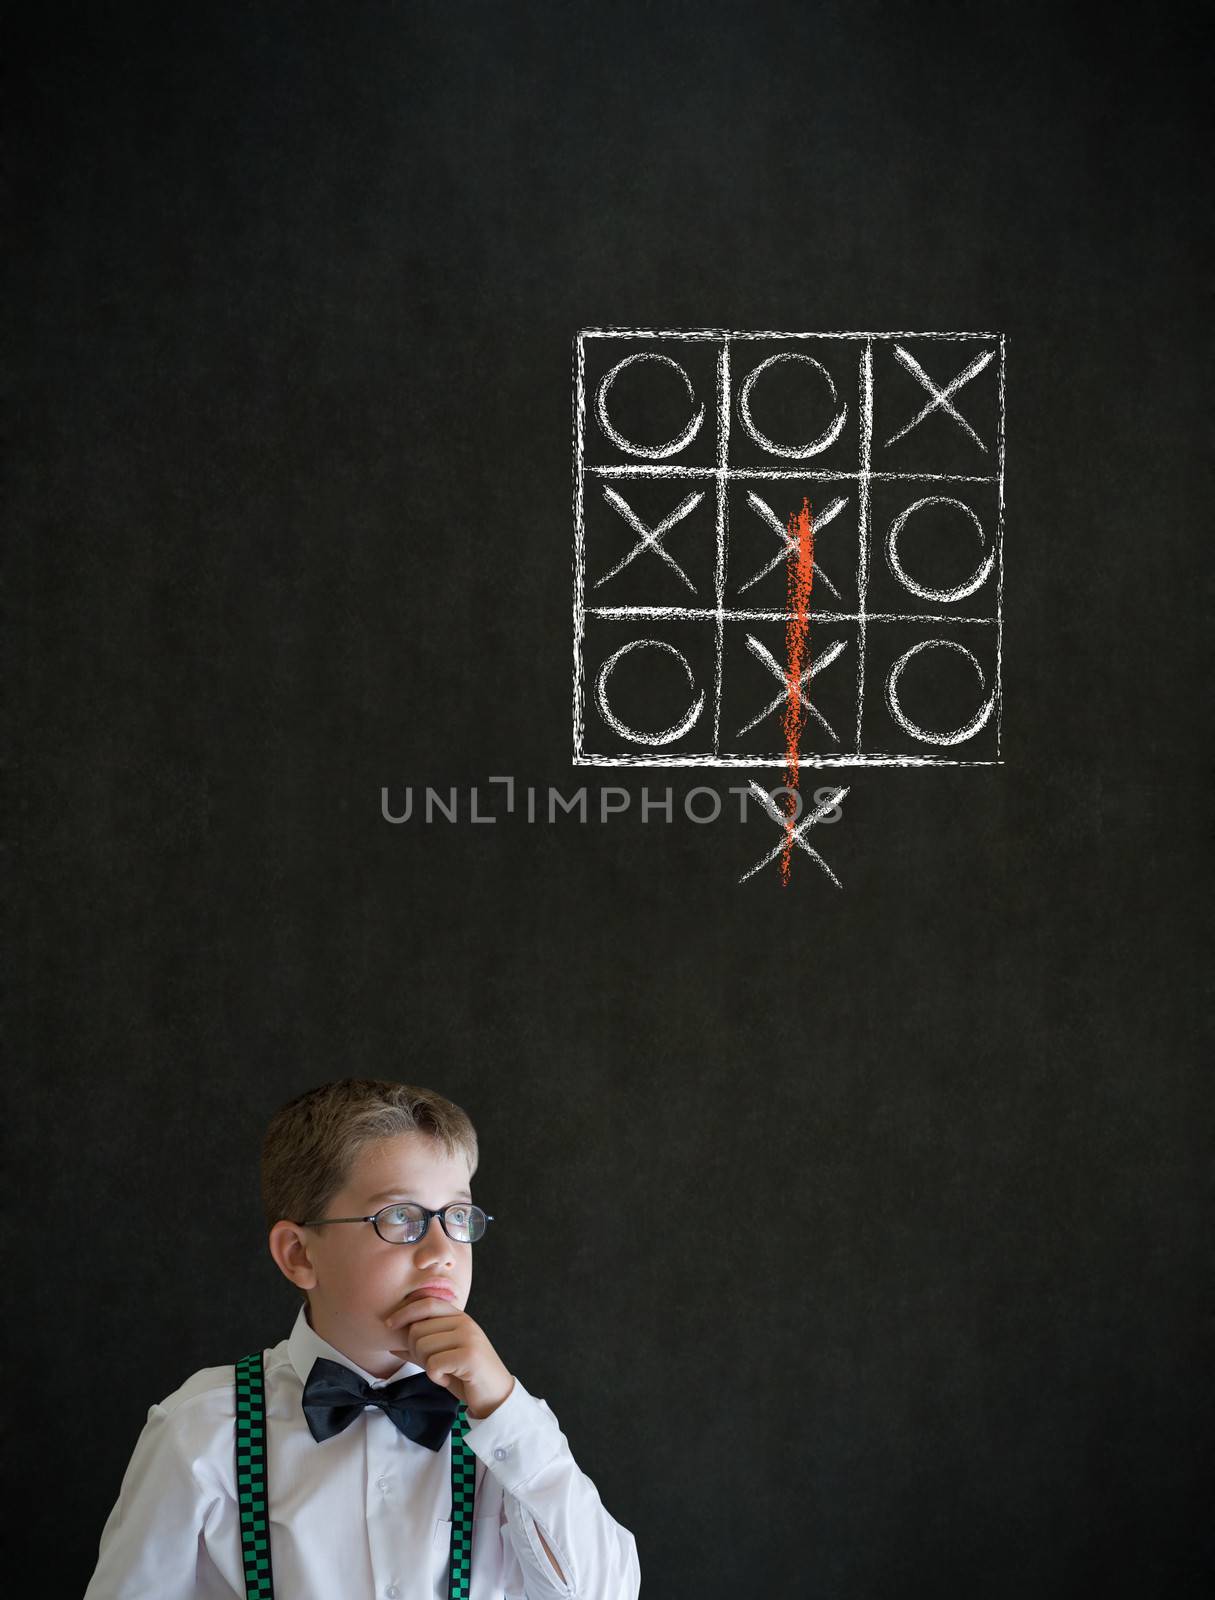 Thinking boy business man with thinking out of the box tic tac toe concept by alistaircotton